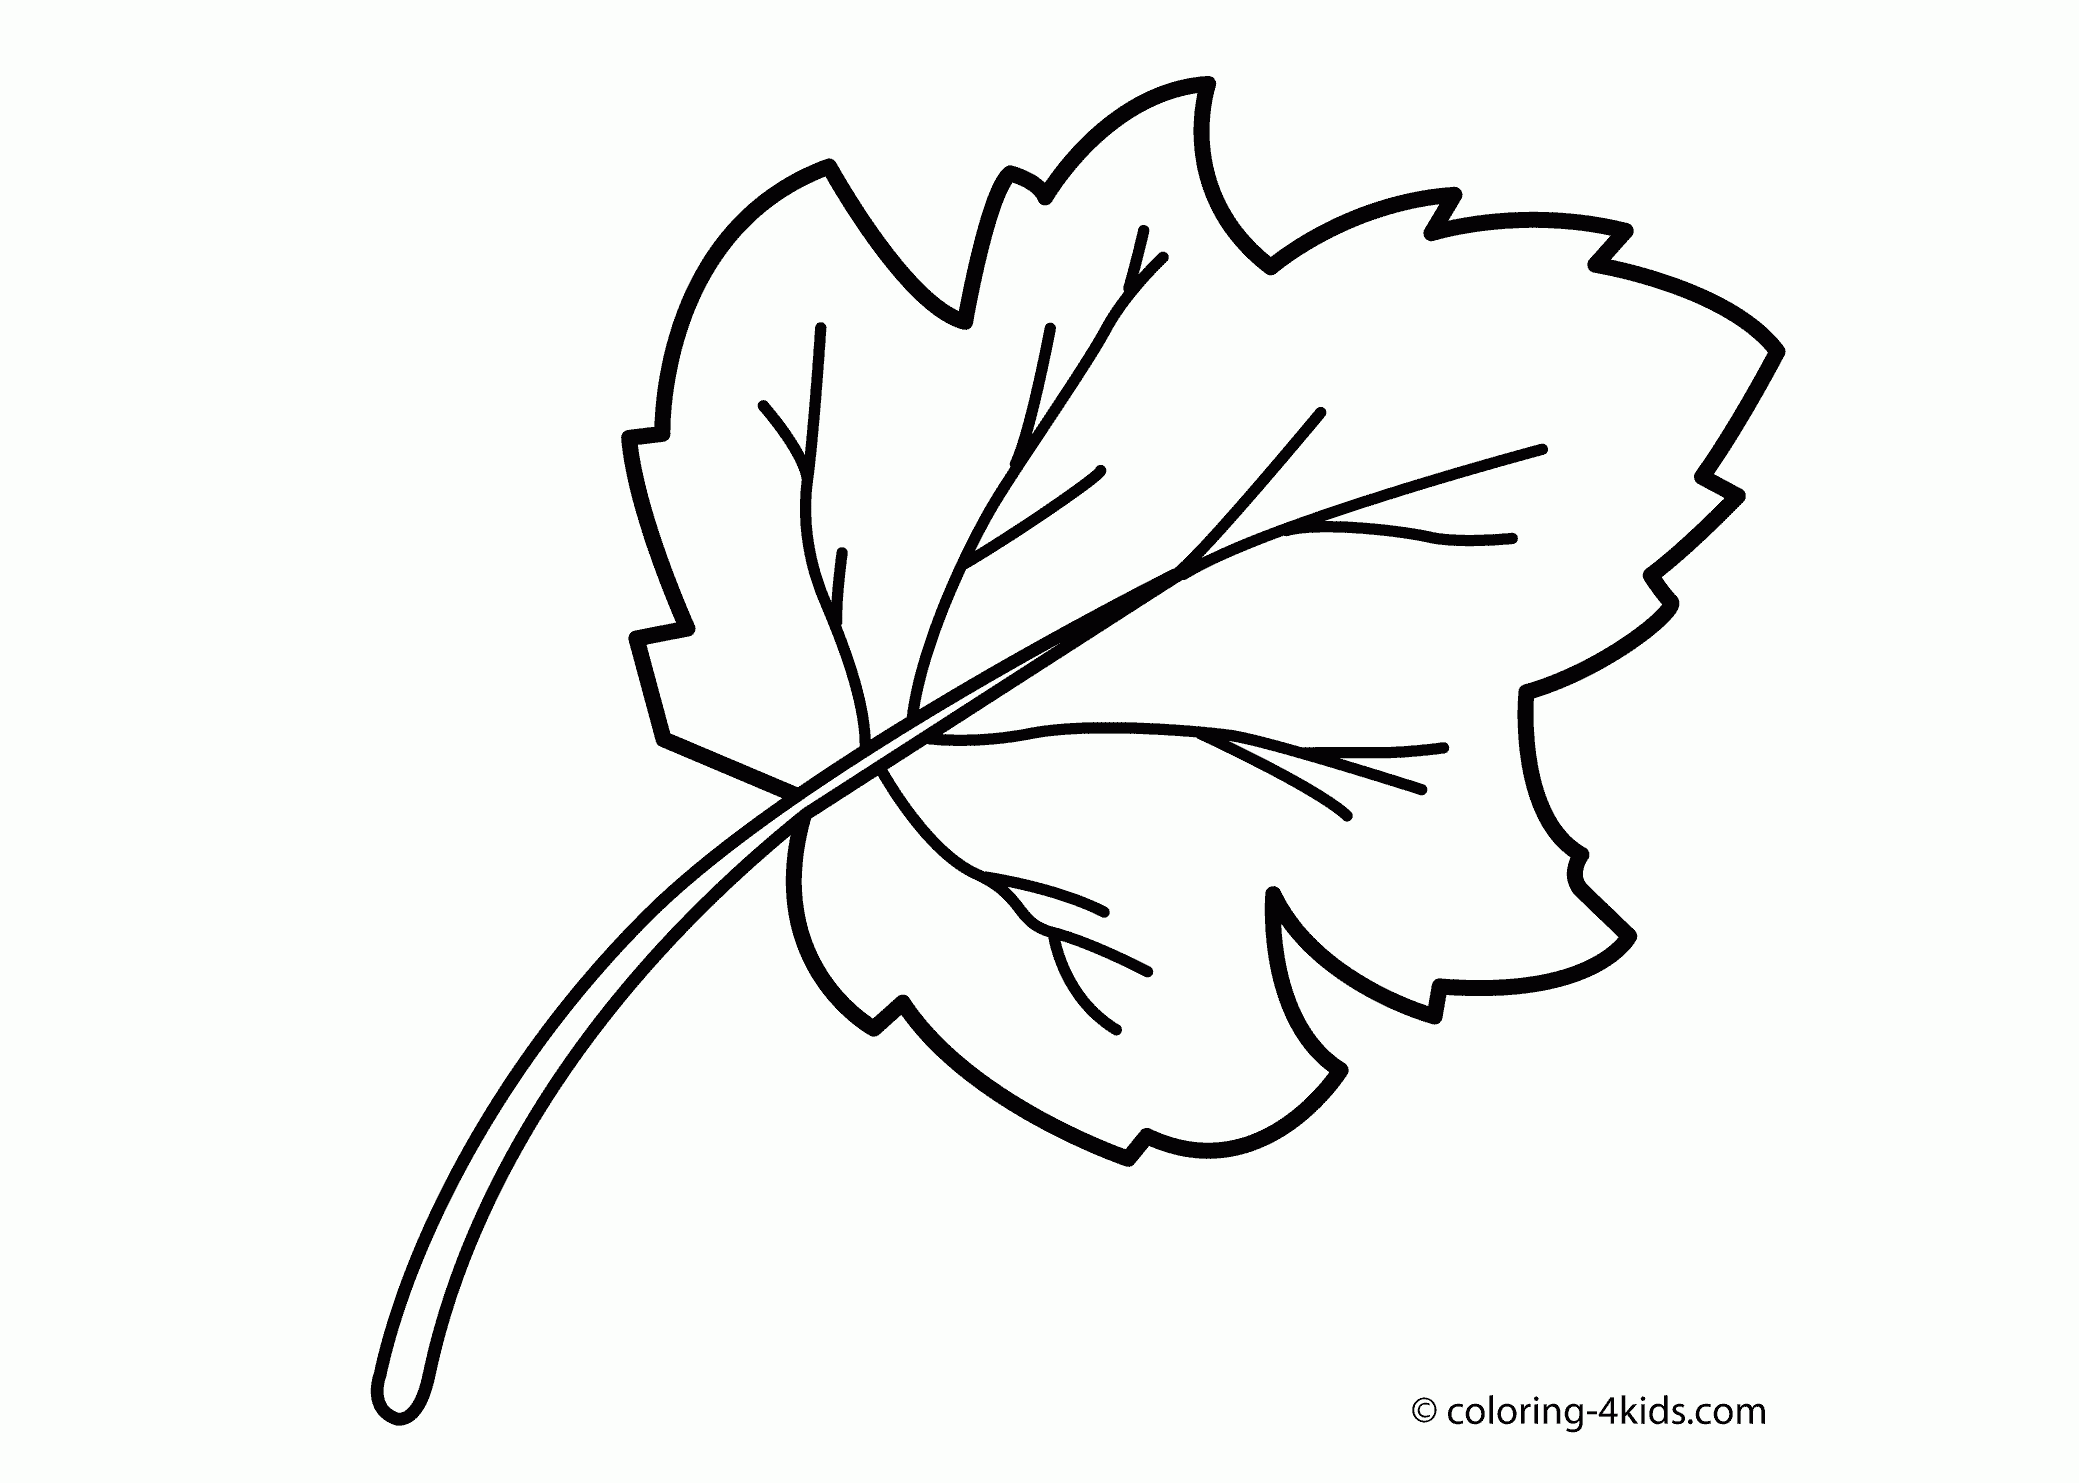 free-leaves-coloring-pages-to-print-download-free-leaves-coloring